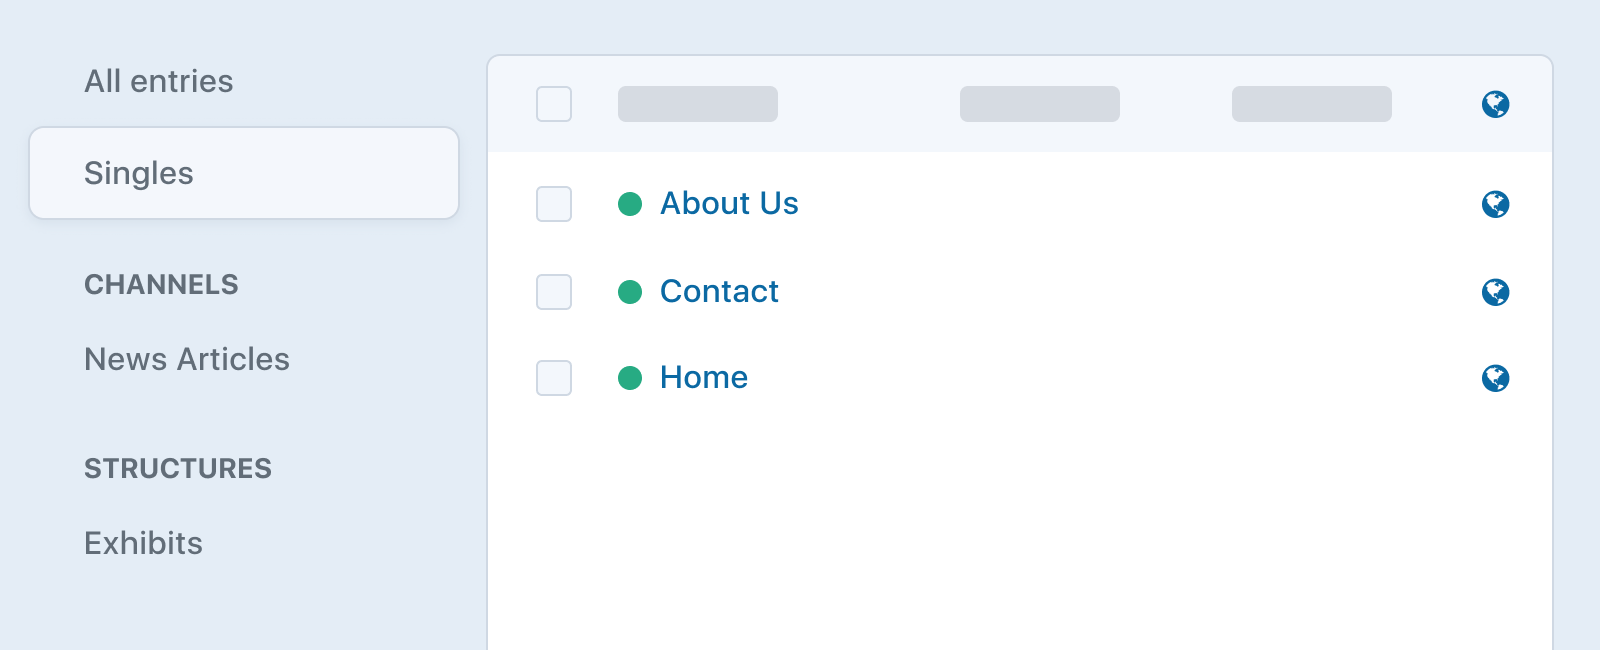 Illustration of Entries layout with “Singles” selected, showing “About Us”, “Contact” and “Home” entries